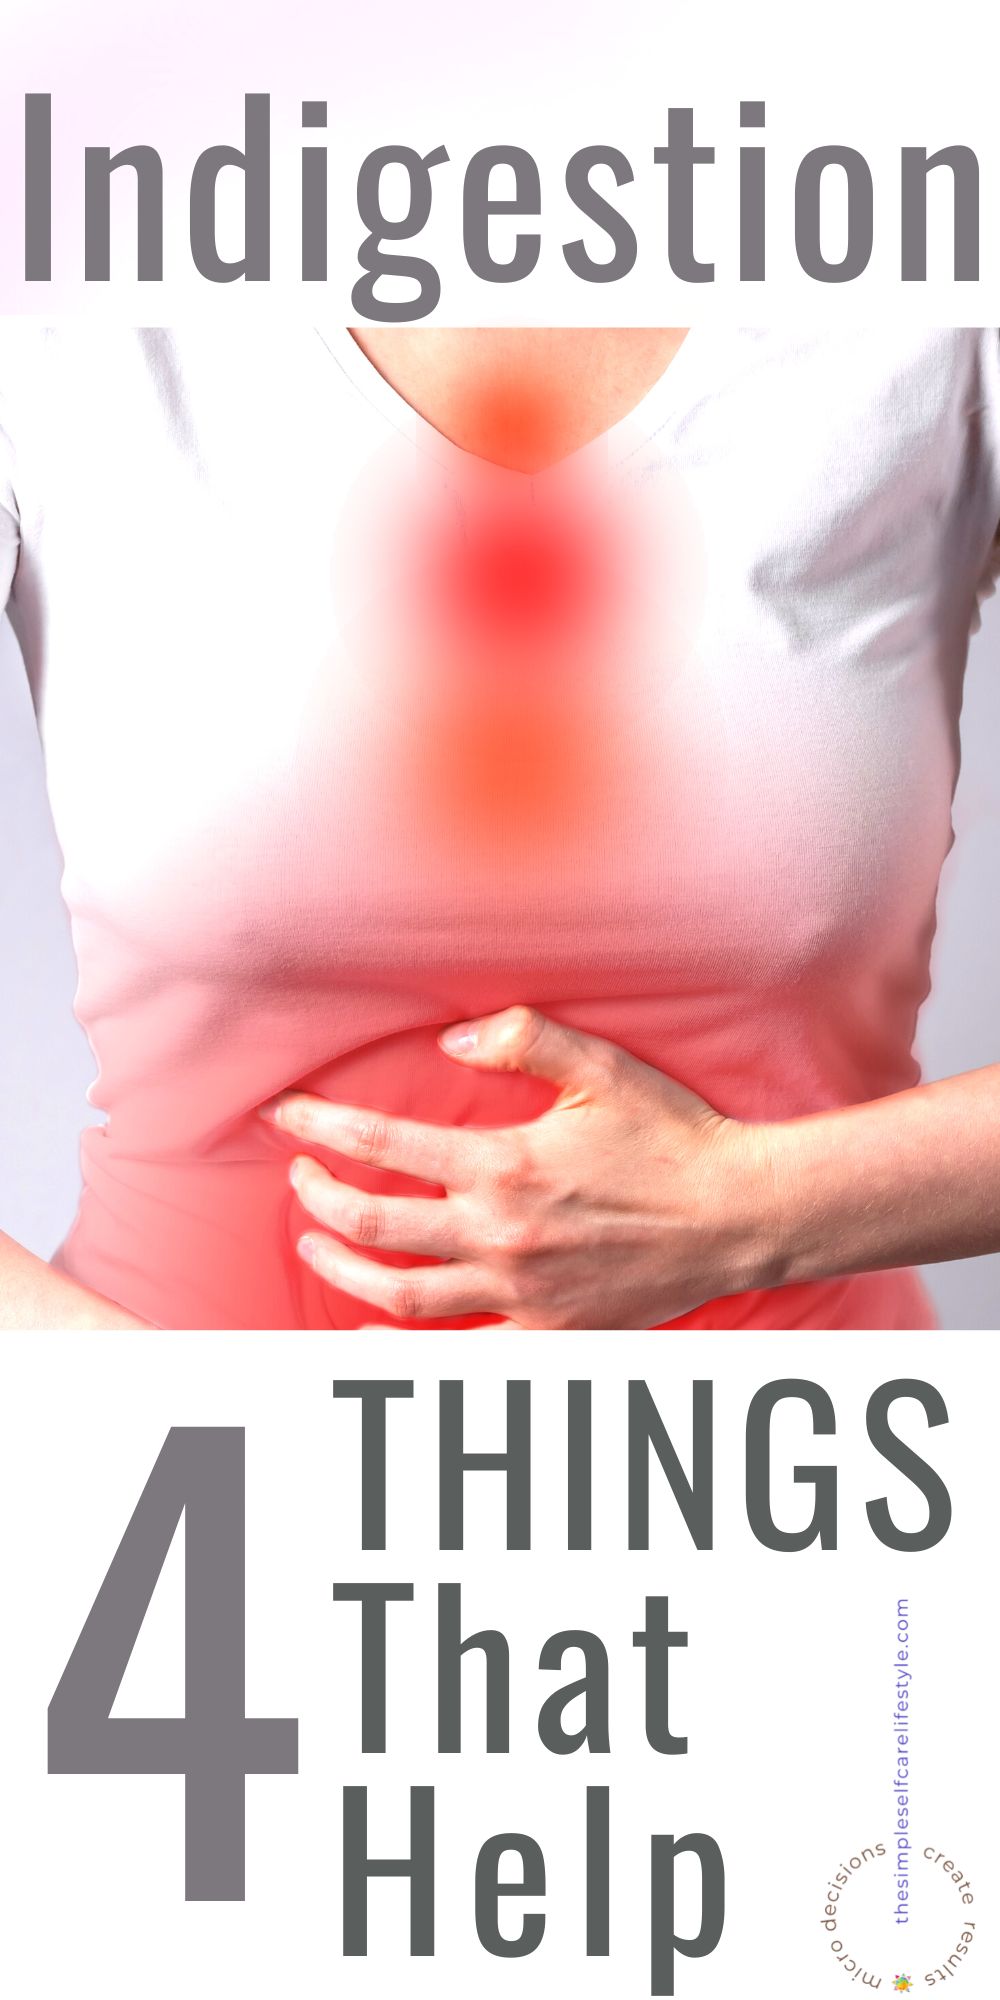 Woman with hands on stomach. Irritated digestive tract from indigestion